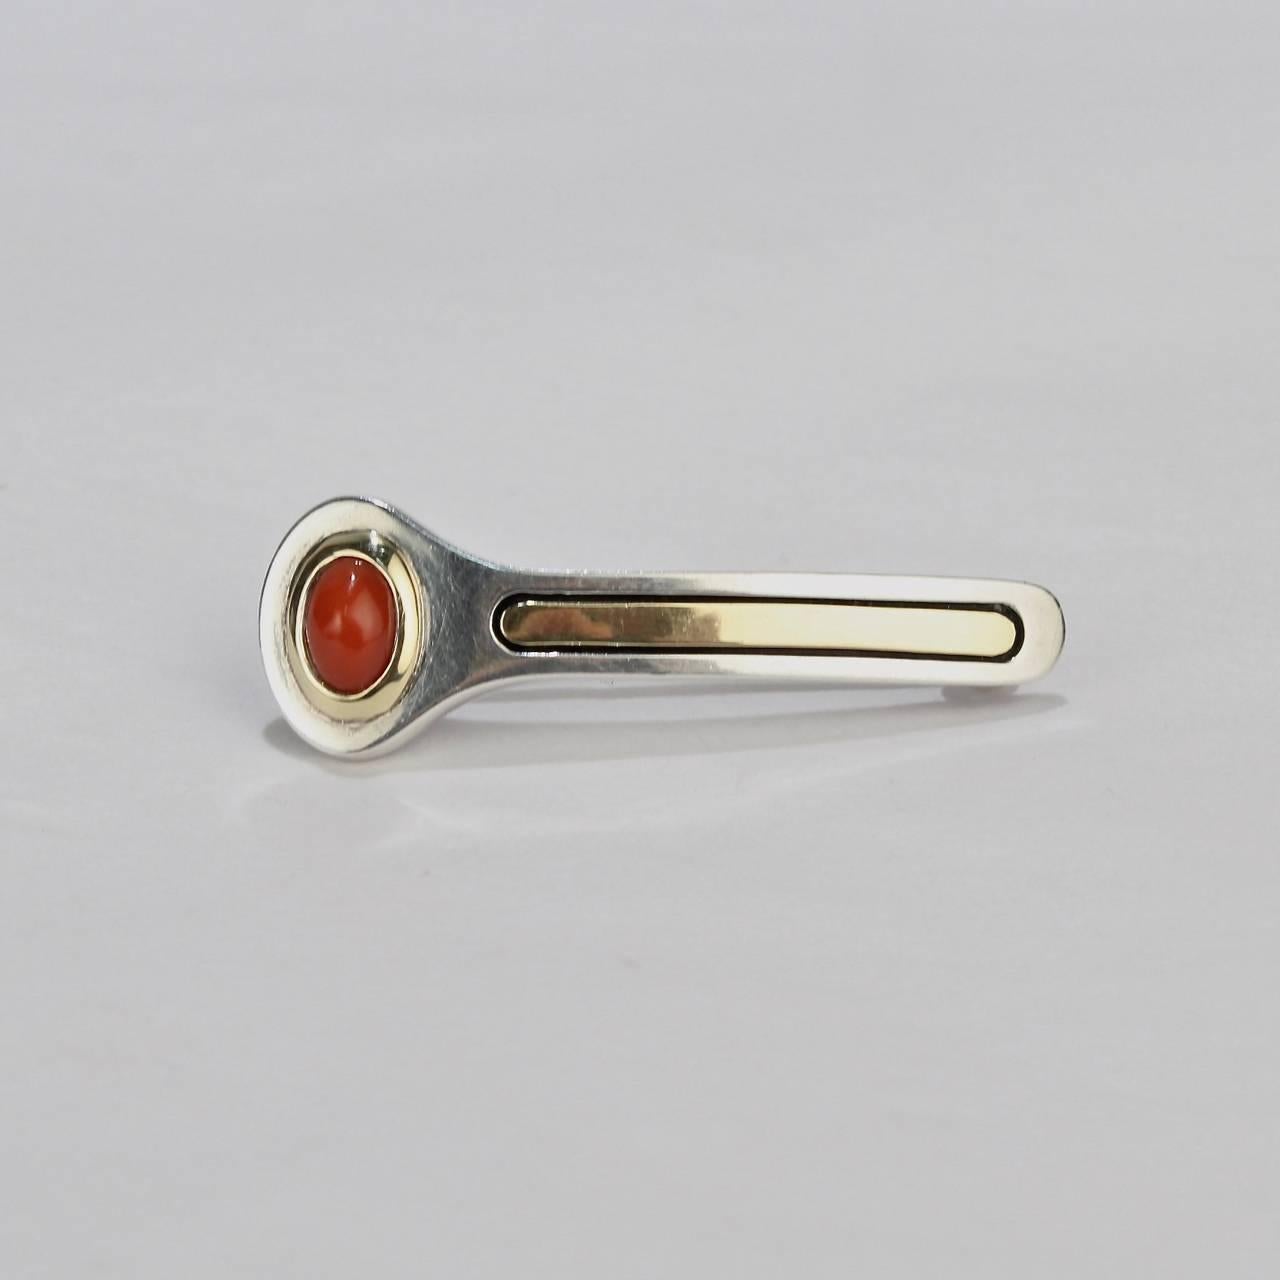 A fine, modernist brooch or lapel pin by Cartier.

Comprised of sterling silver, 18-karat yellow gold, and set with a salmon red coral cabochon. 

A wonderful brooch with both simple & modern lines. 

Marked on the reverse: Cartier / 925 /